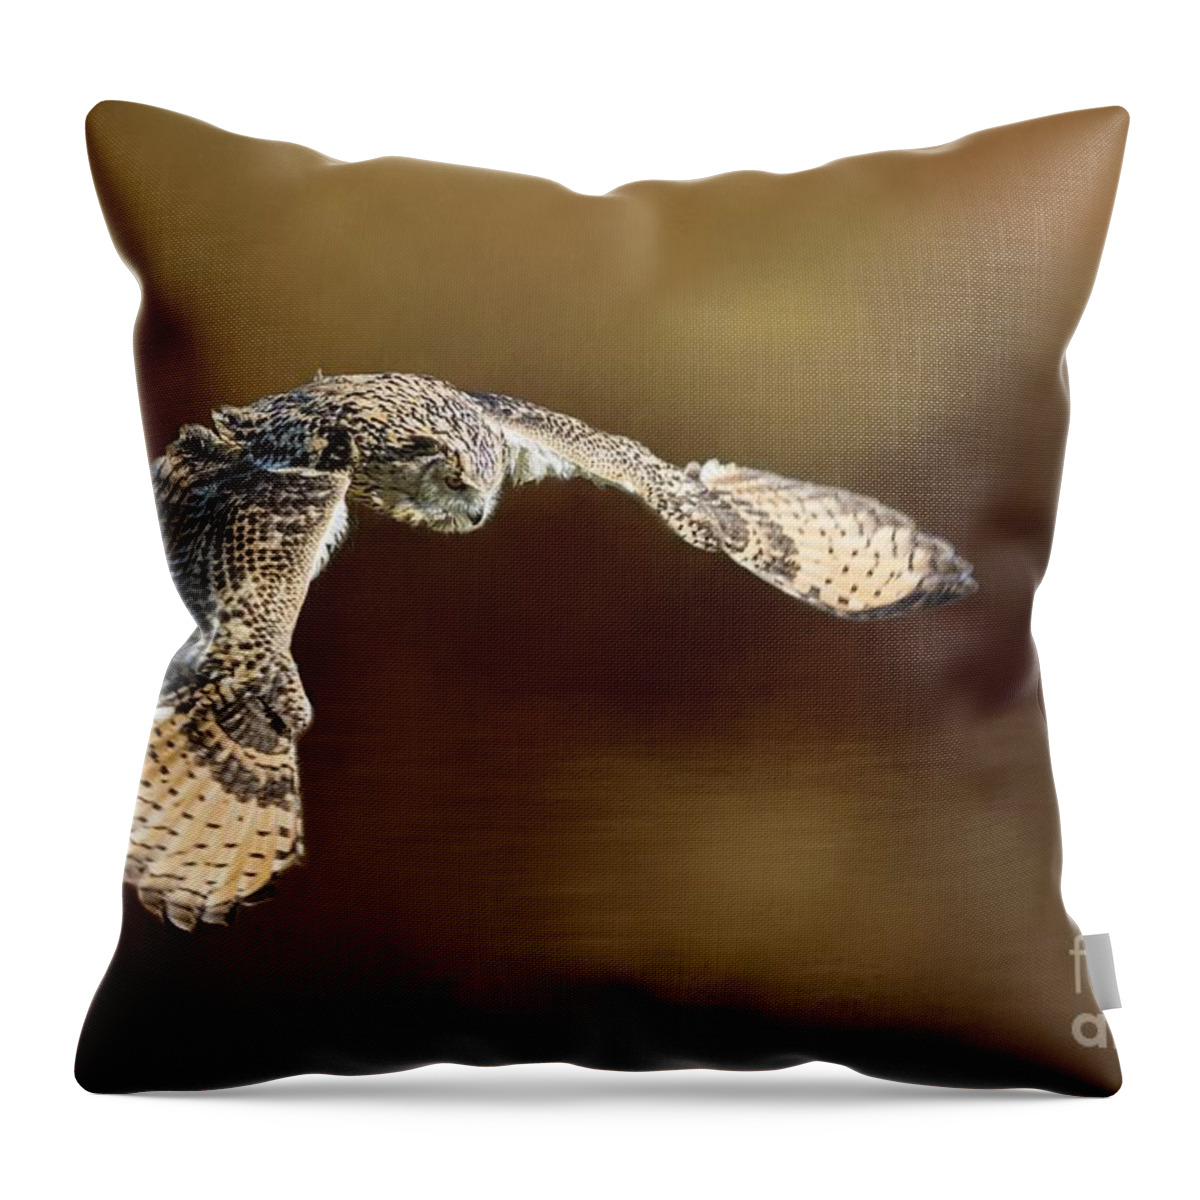 Bubo Bubo Sibiricus Throw Pillow featuring the photograph In Flight #1 by Eva Lechner